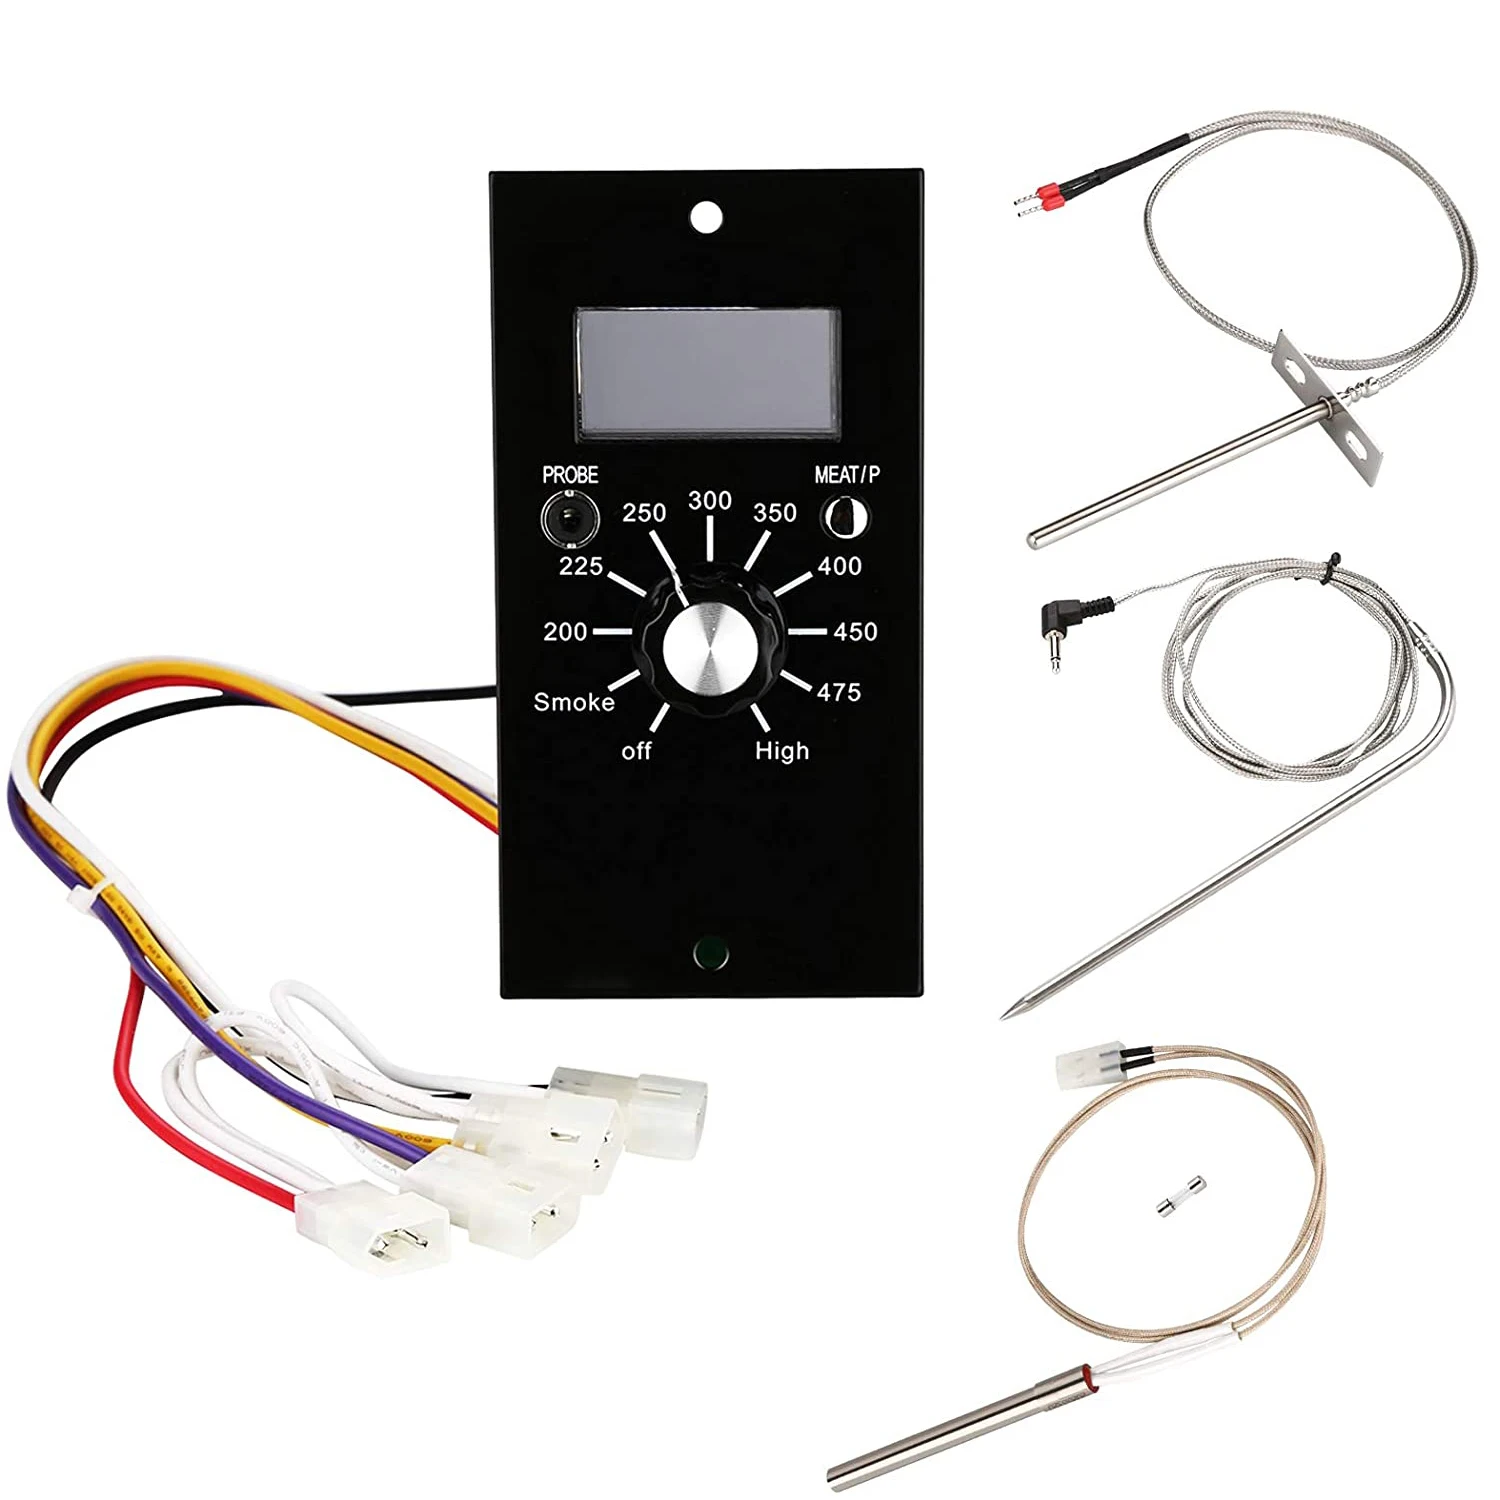 Replacement Parts for Pit Boss Pellet Grills Thermostat Kit Digital Controller Board/Probe Sensor/Ignitor/Meat Probe